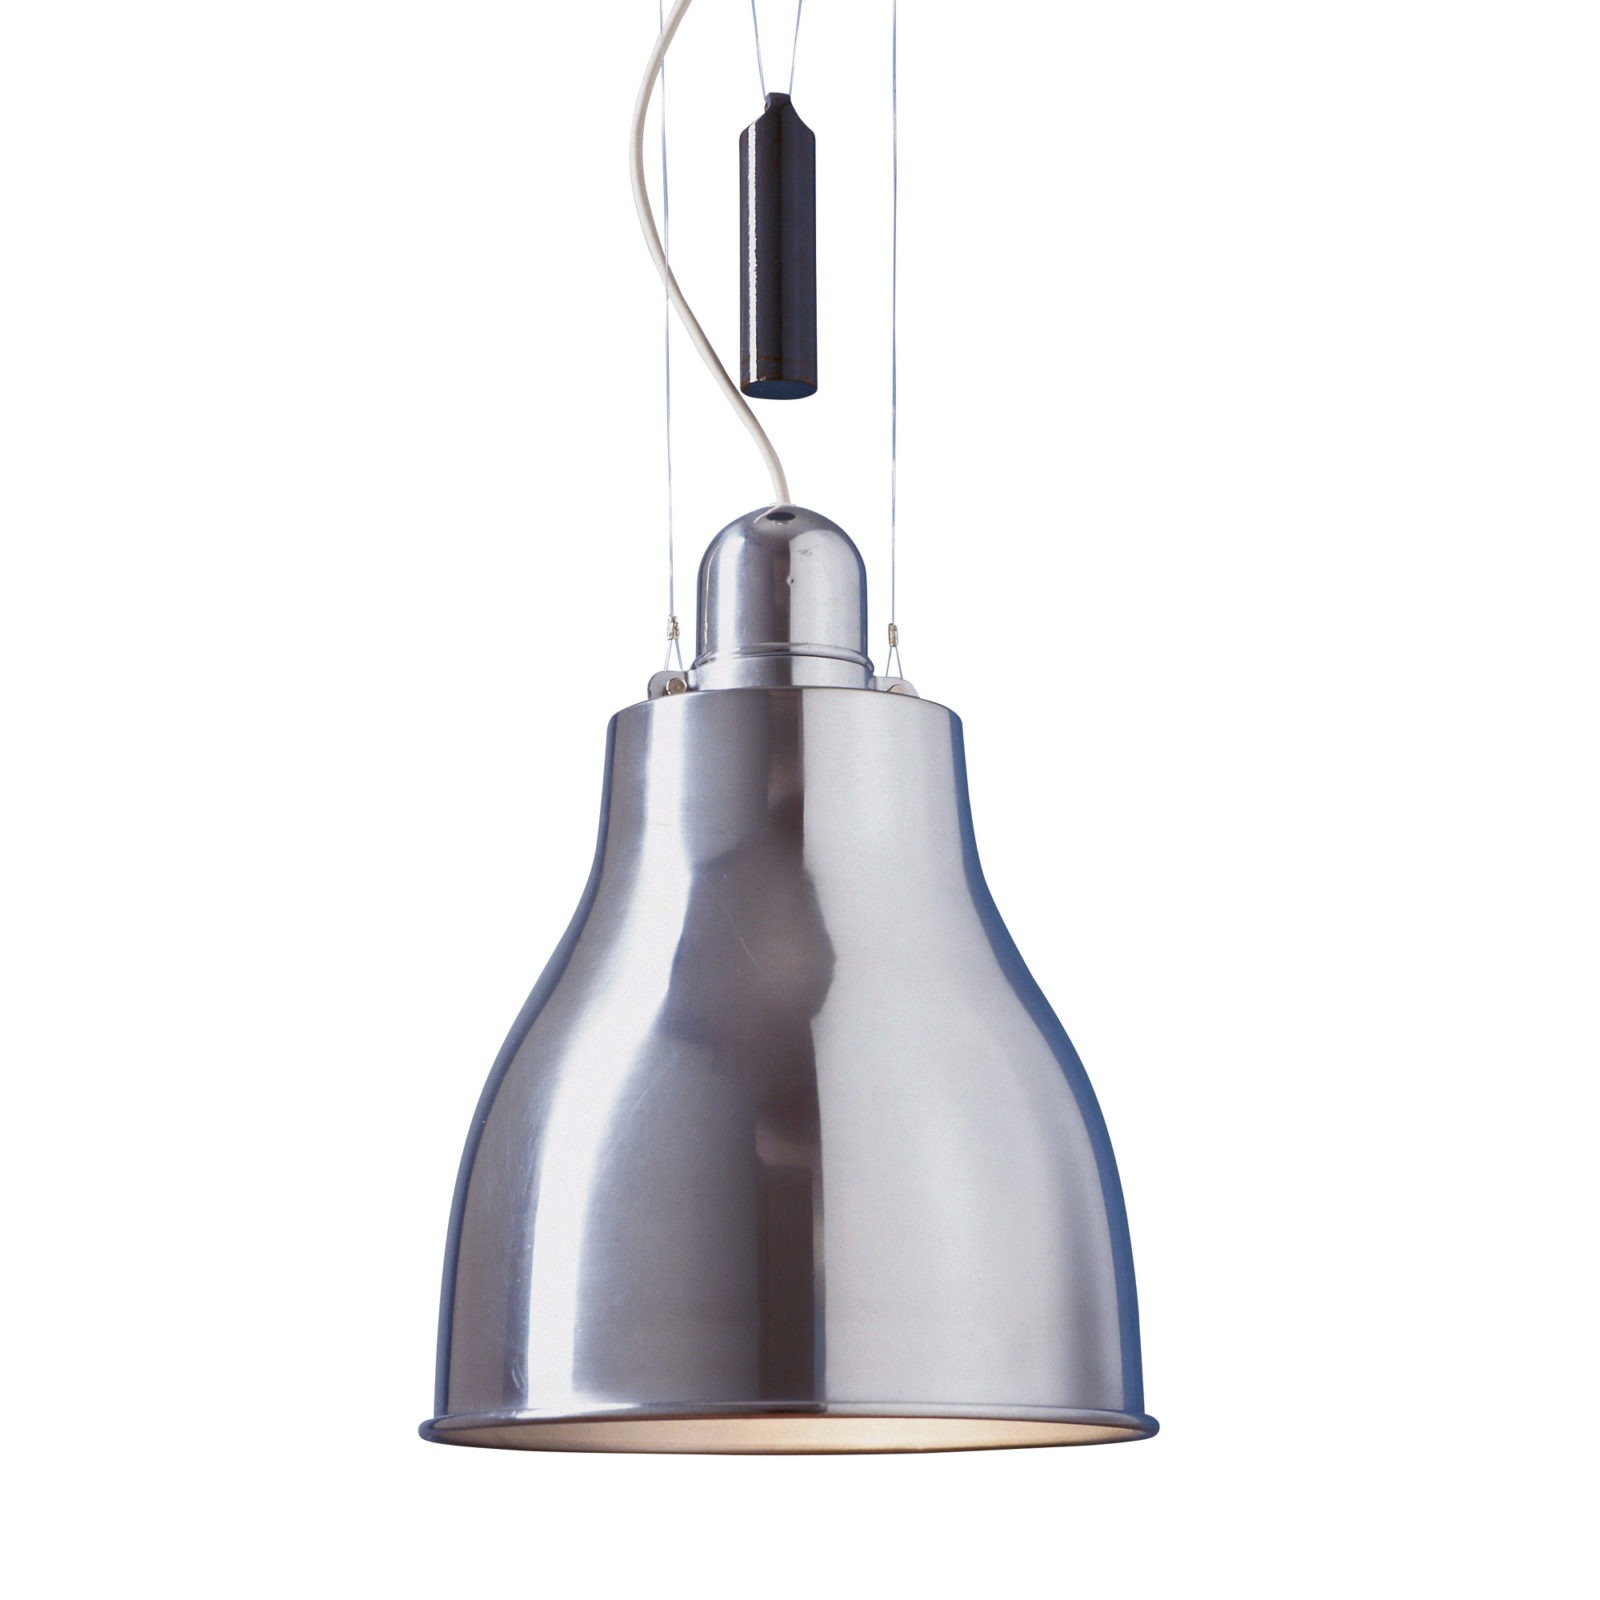 Pendant lamp reminiscent of an upside-down glass, made of polished, clear lacquered aluminium, TAKTER.